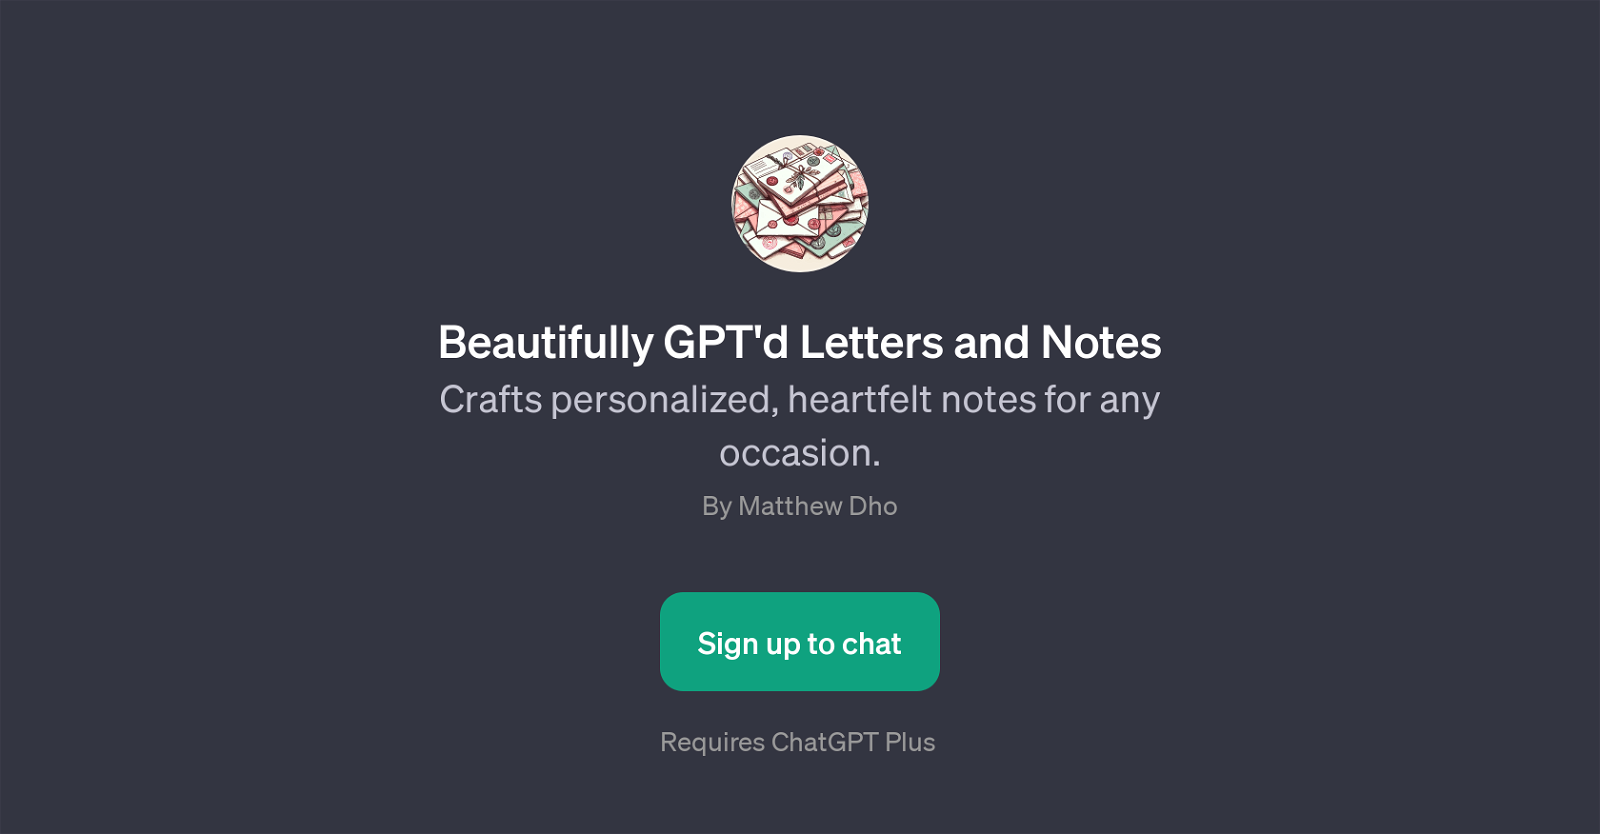 Beautifully GPT'd Letters and Notes website